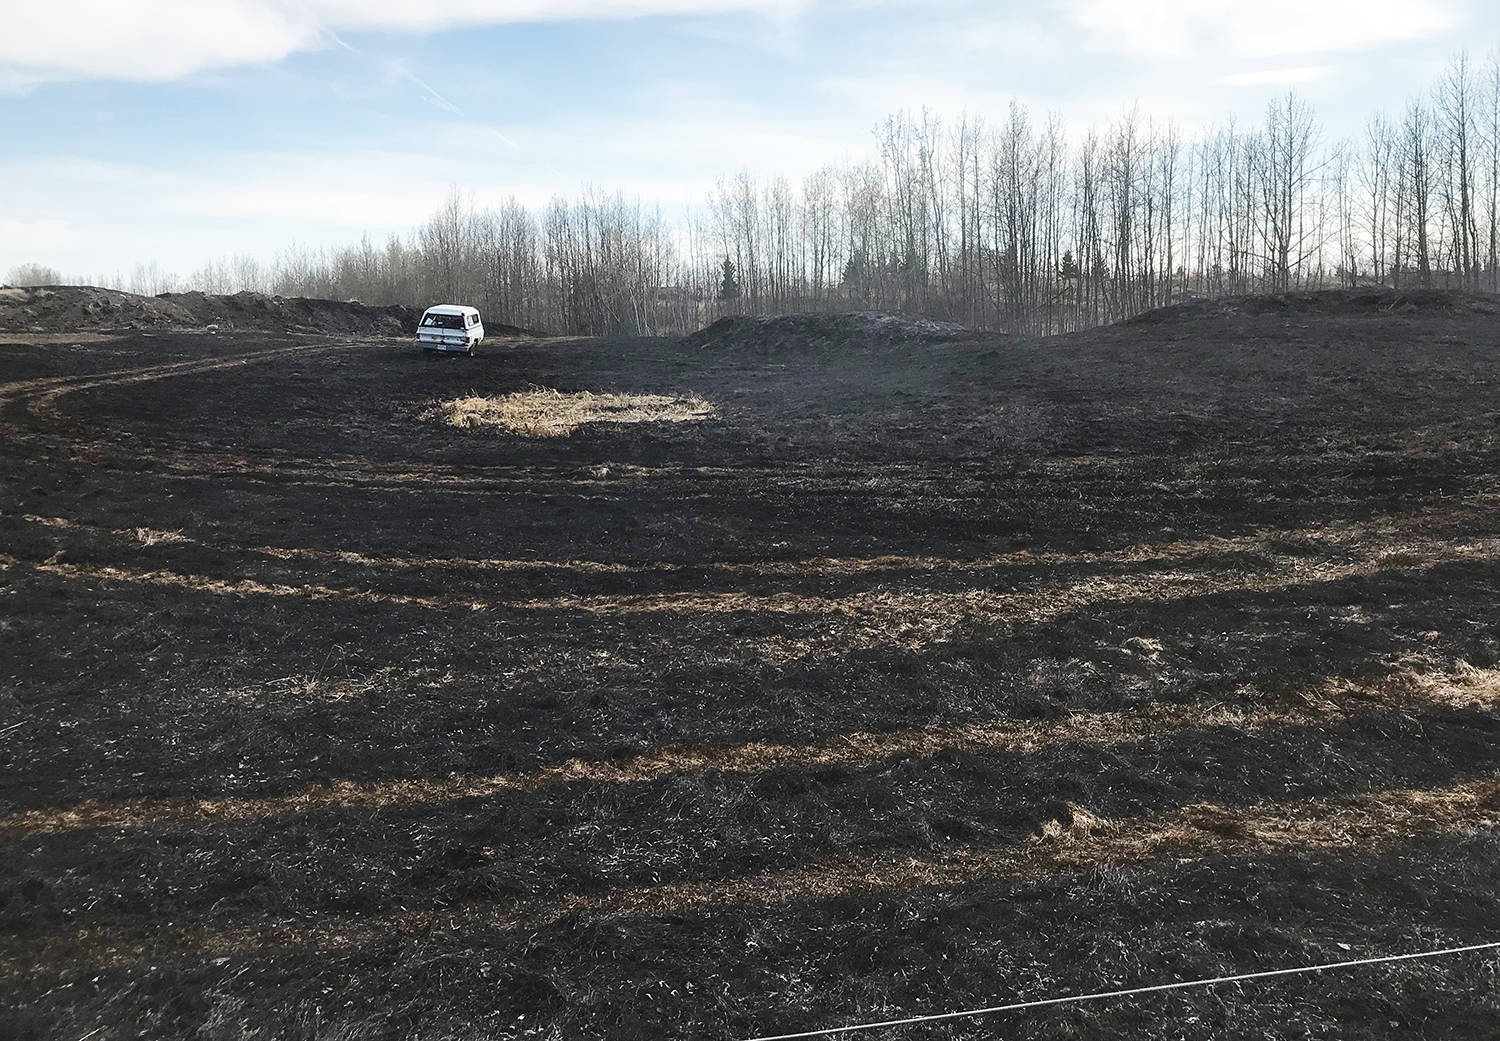 Members of the Ponoka County West District Fire Department handled a few grass fires Saturday afternoon. The warm weather and heavy winds recently helped create ideal grass fire conditions.                                Photos courtesy of the Ponoka County West District Fire Department